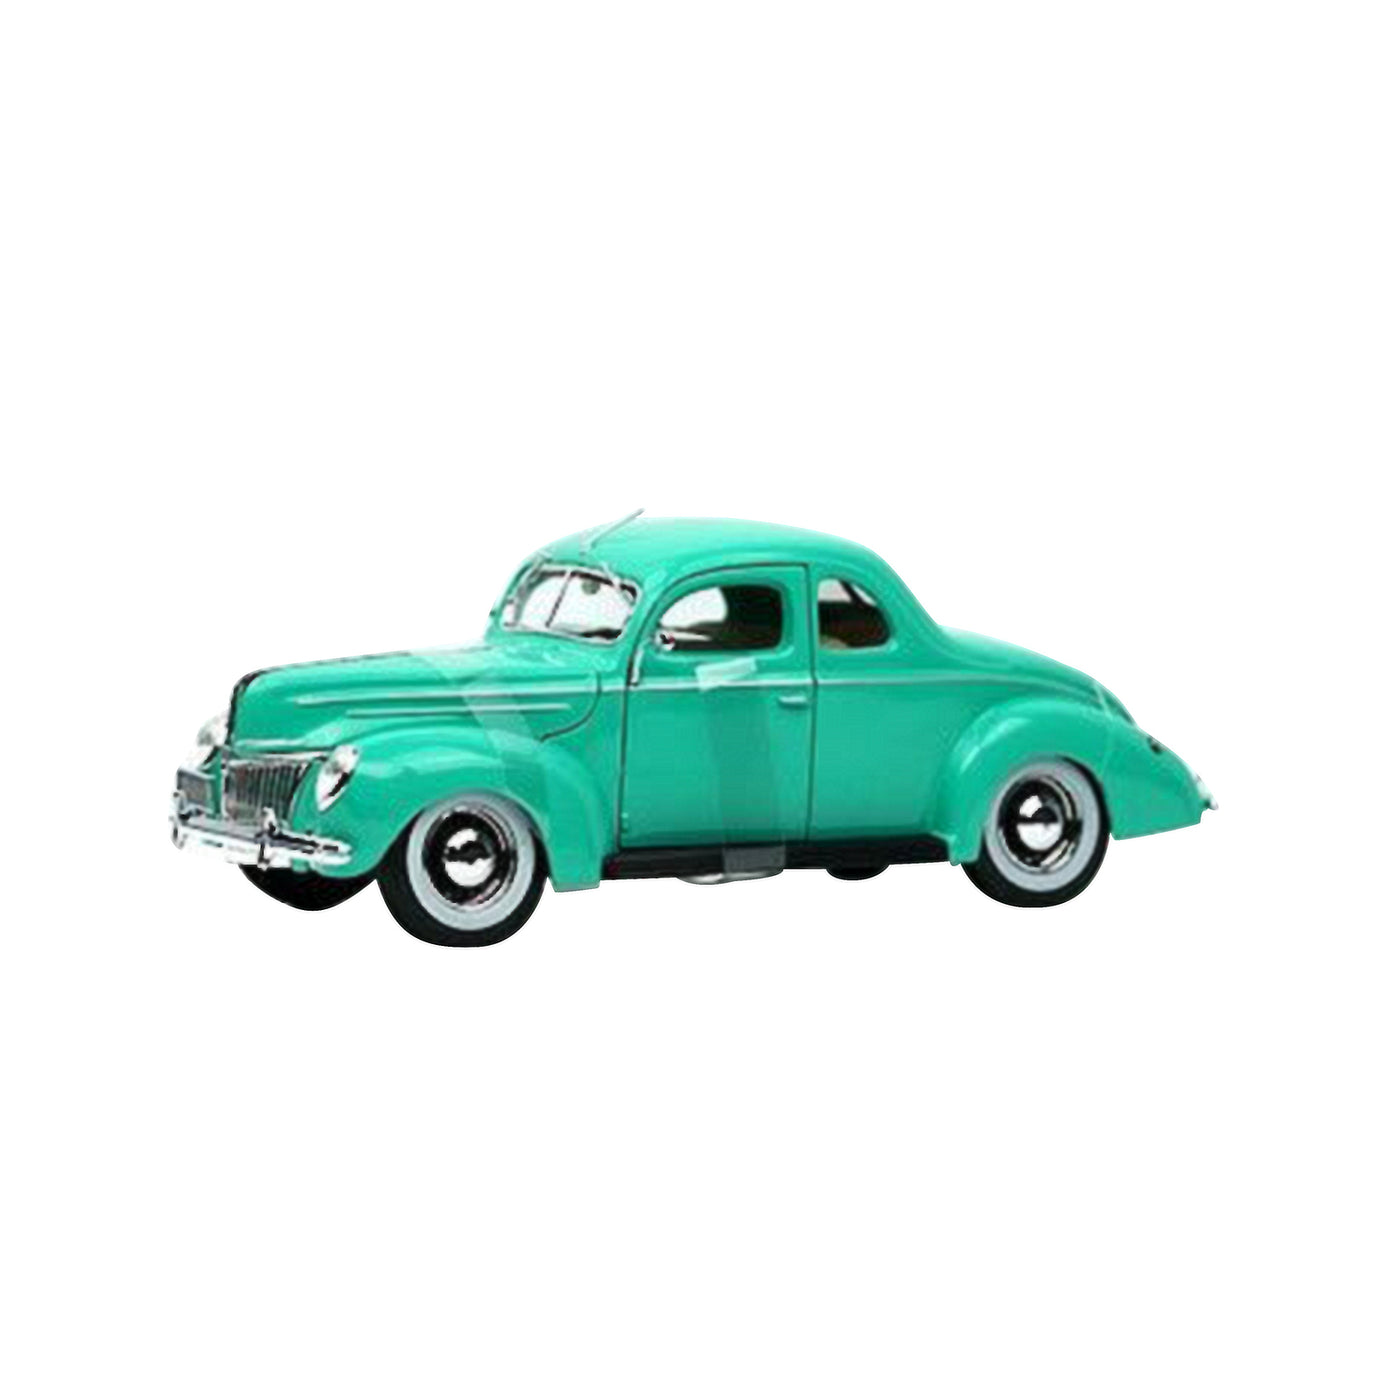 Maisto - 1:18 1939 Ford Deluxe Coupe Mint Green